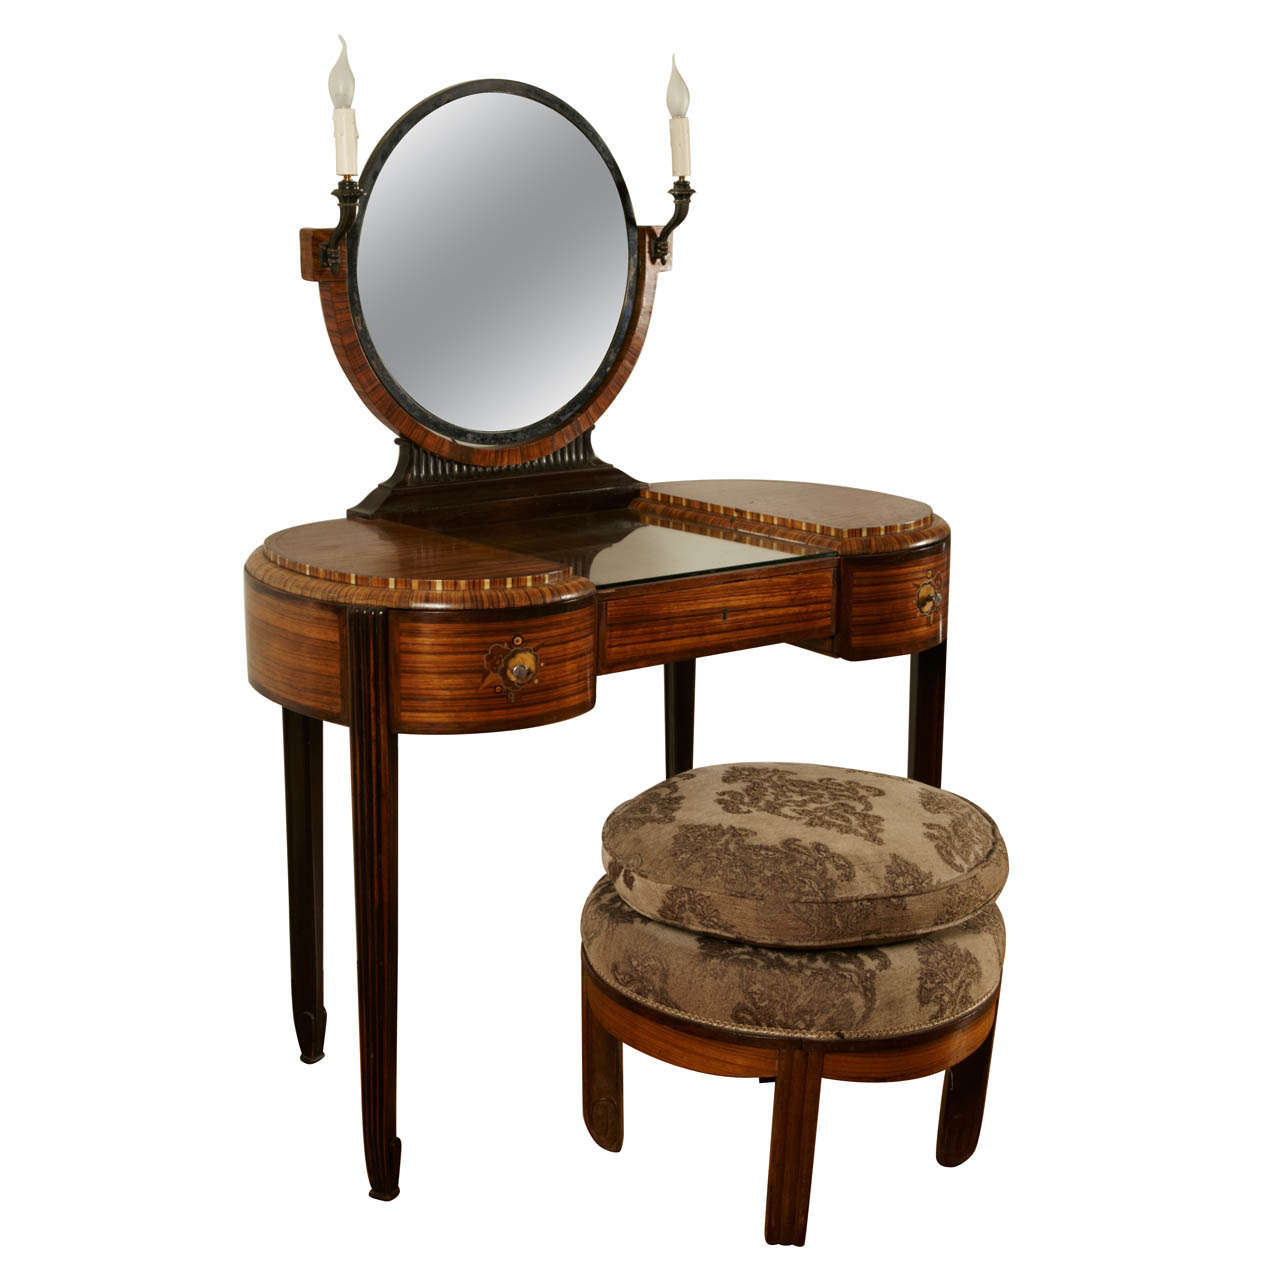 Art Deco Dressing Table with Stool by Krieger, circa 1925